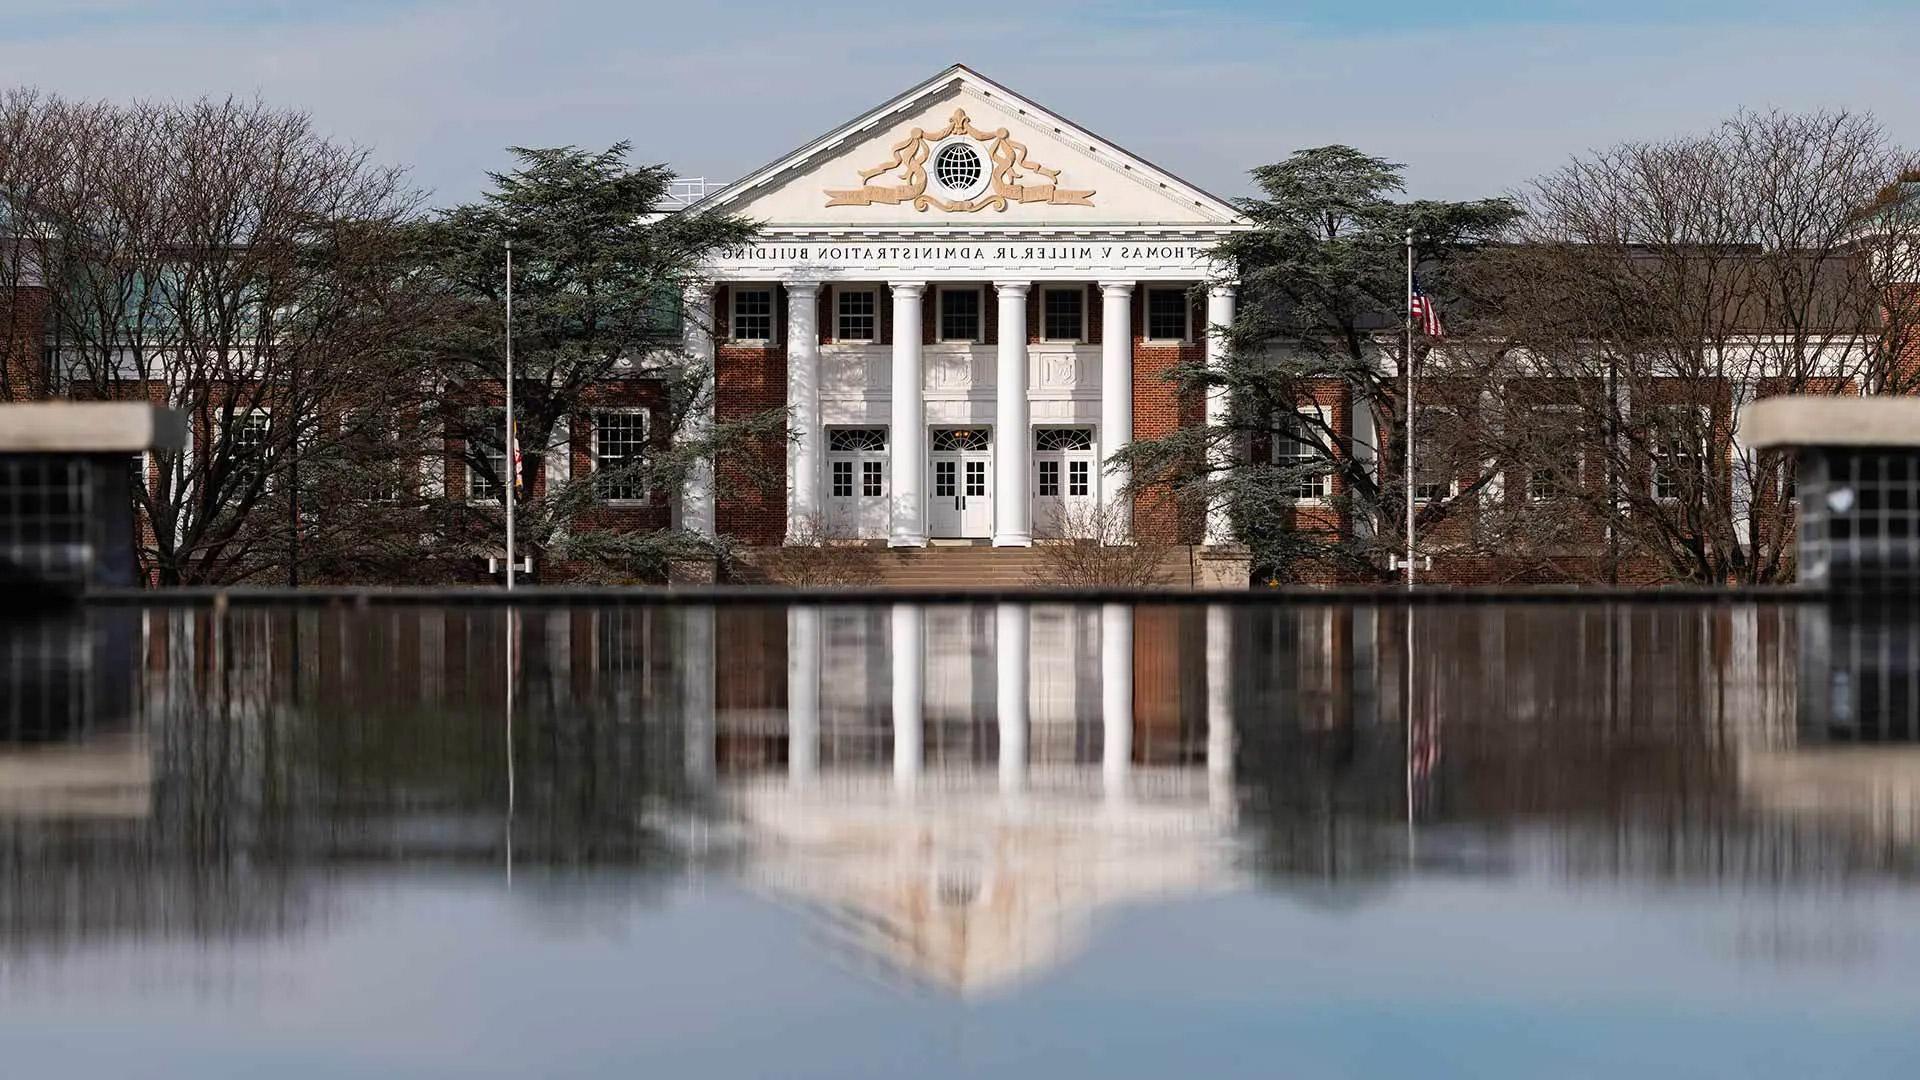 Thomas V. Miller Main Admin Building seen from the low perspective of the reflecting pool